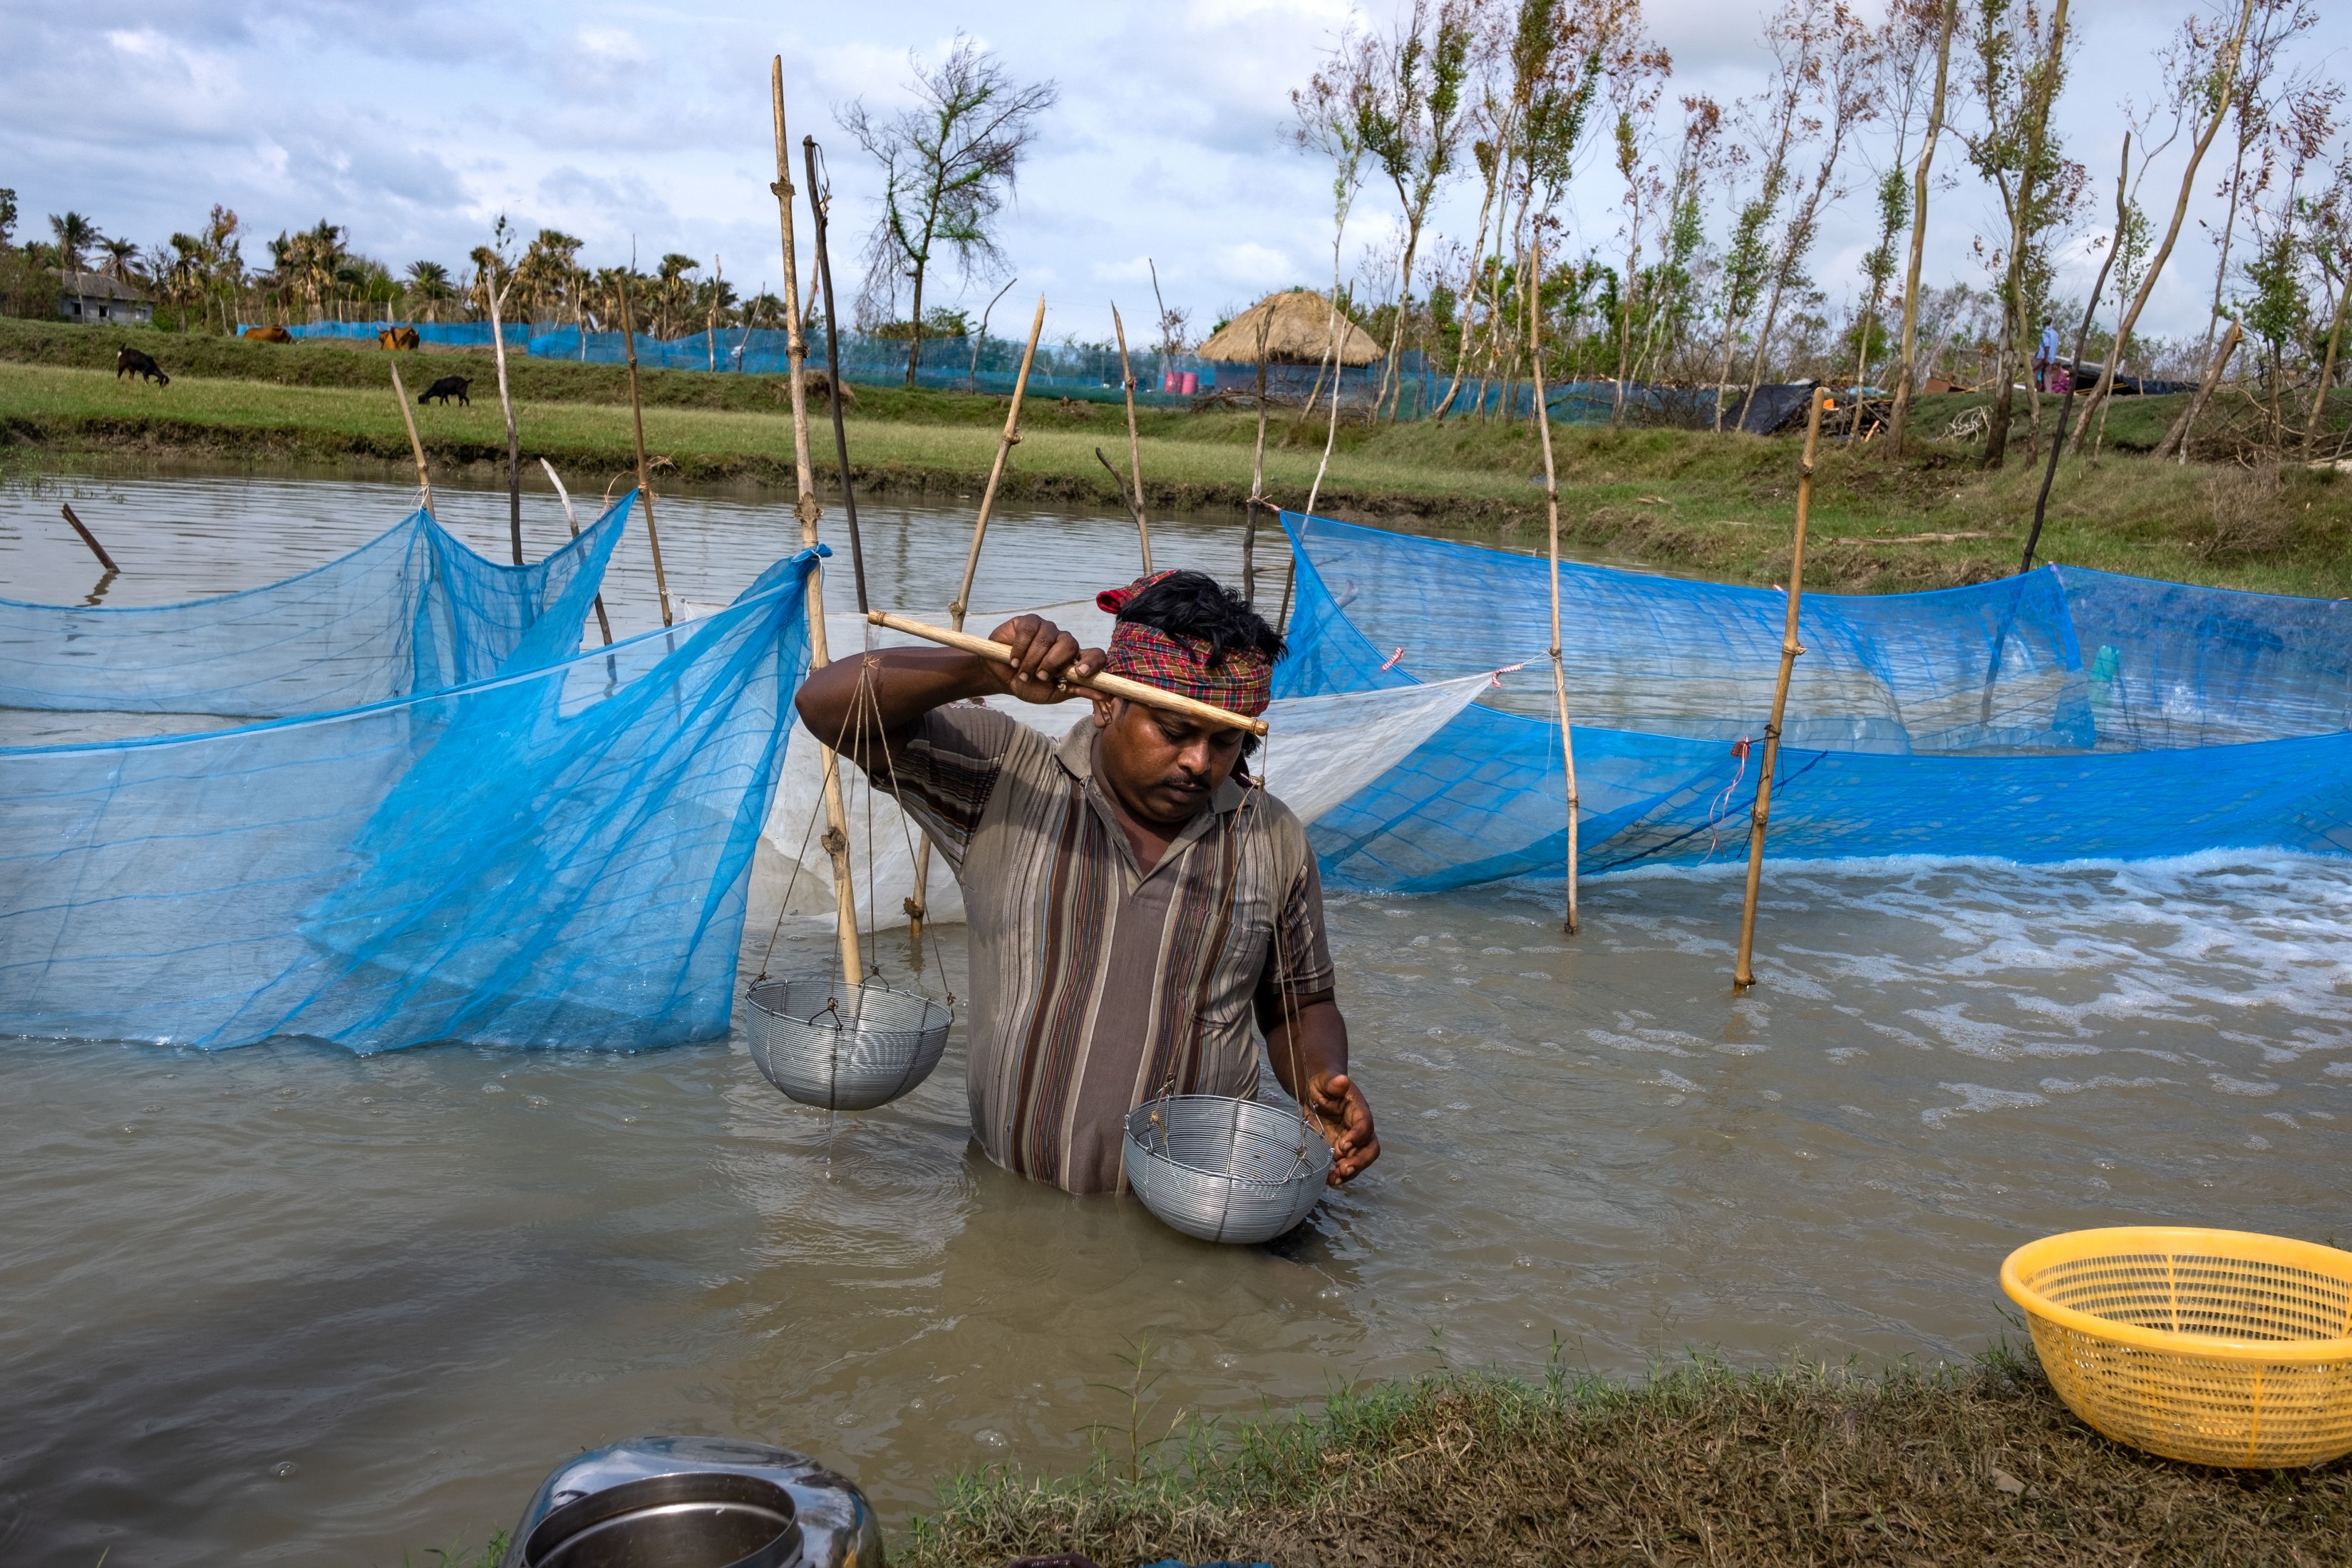 However, this occupation has suffered terribly due to the cyclone. (Image: WaterAid, Subhrajit Sen)